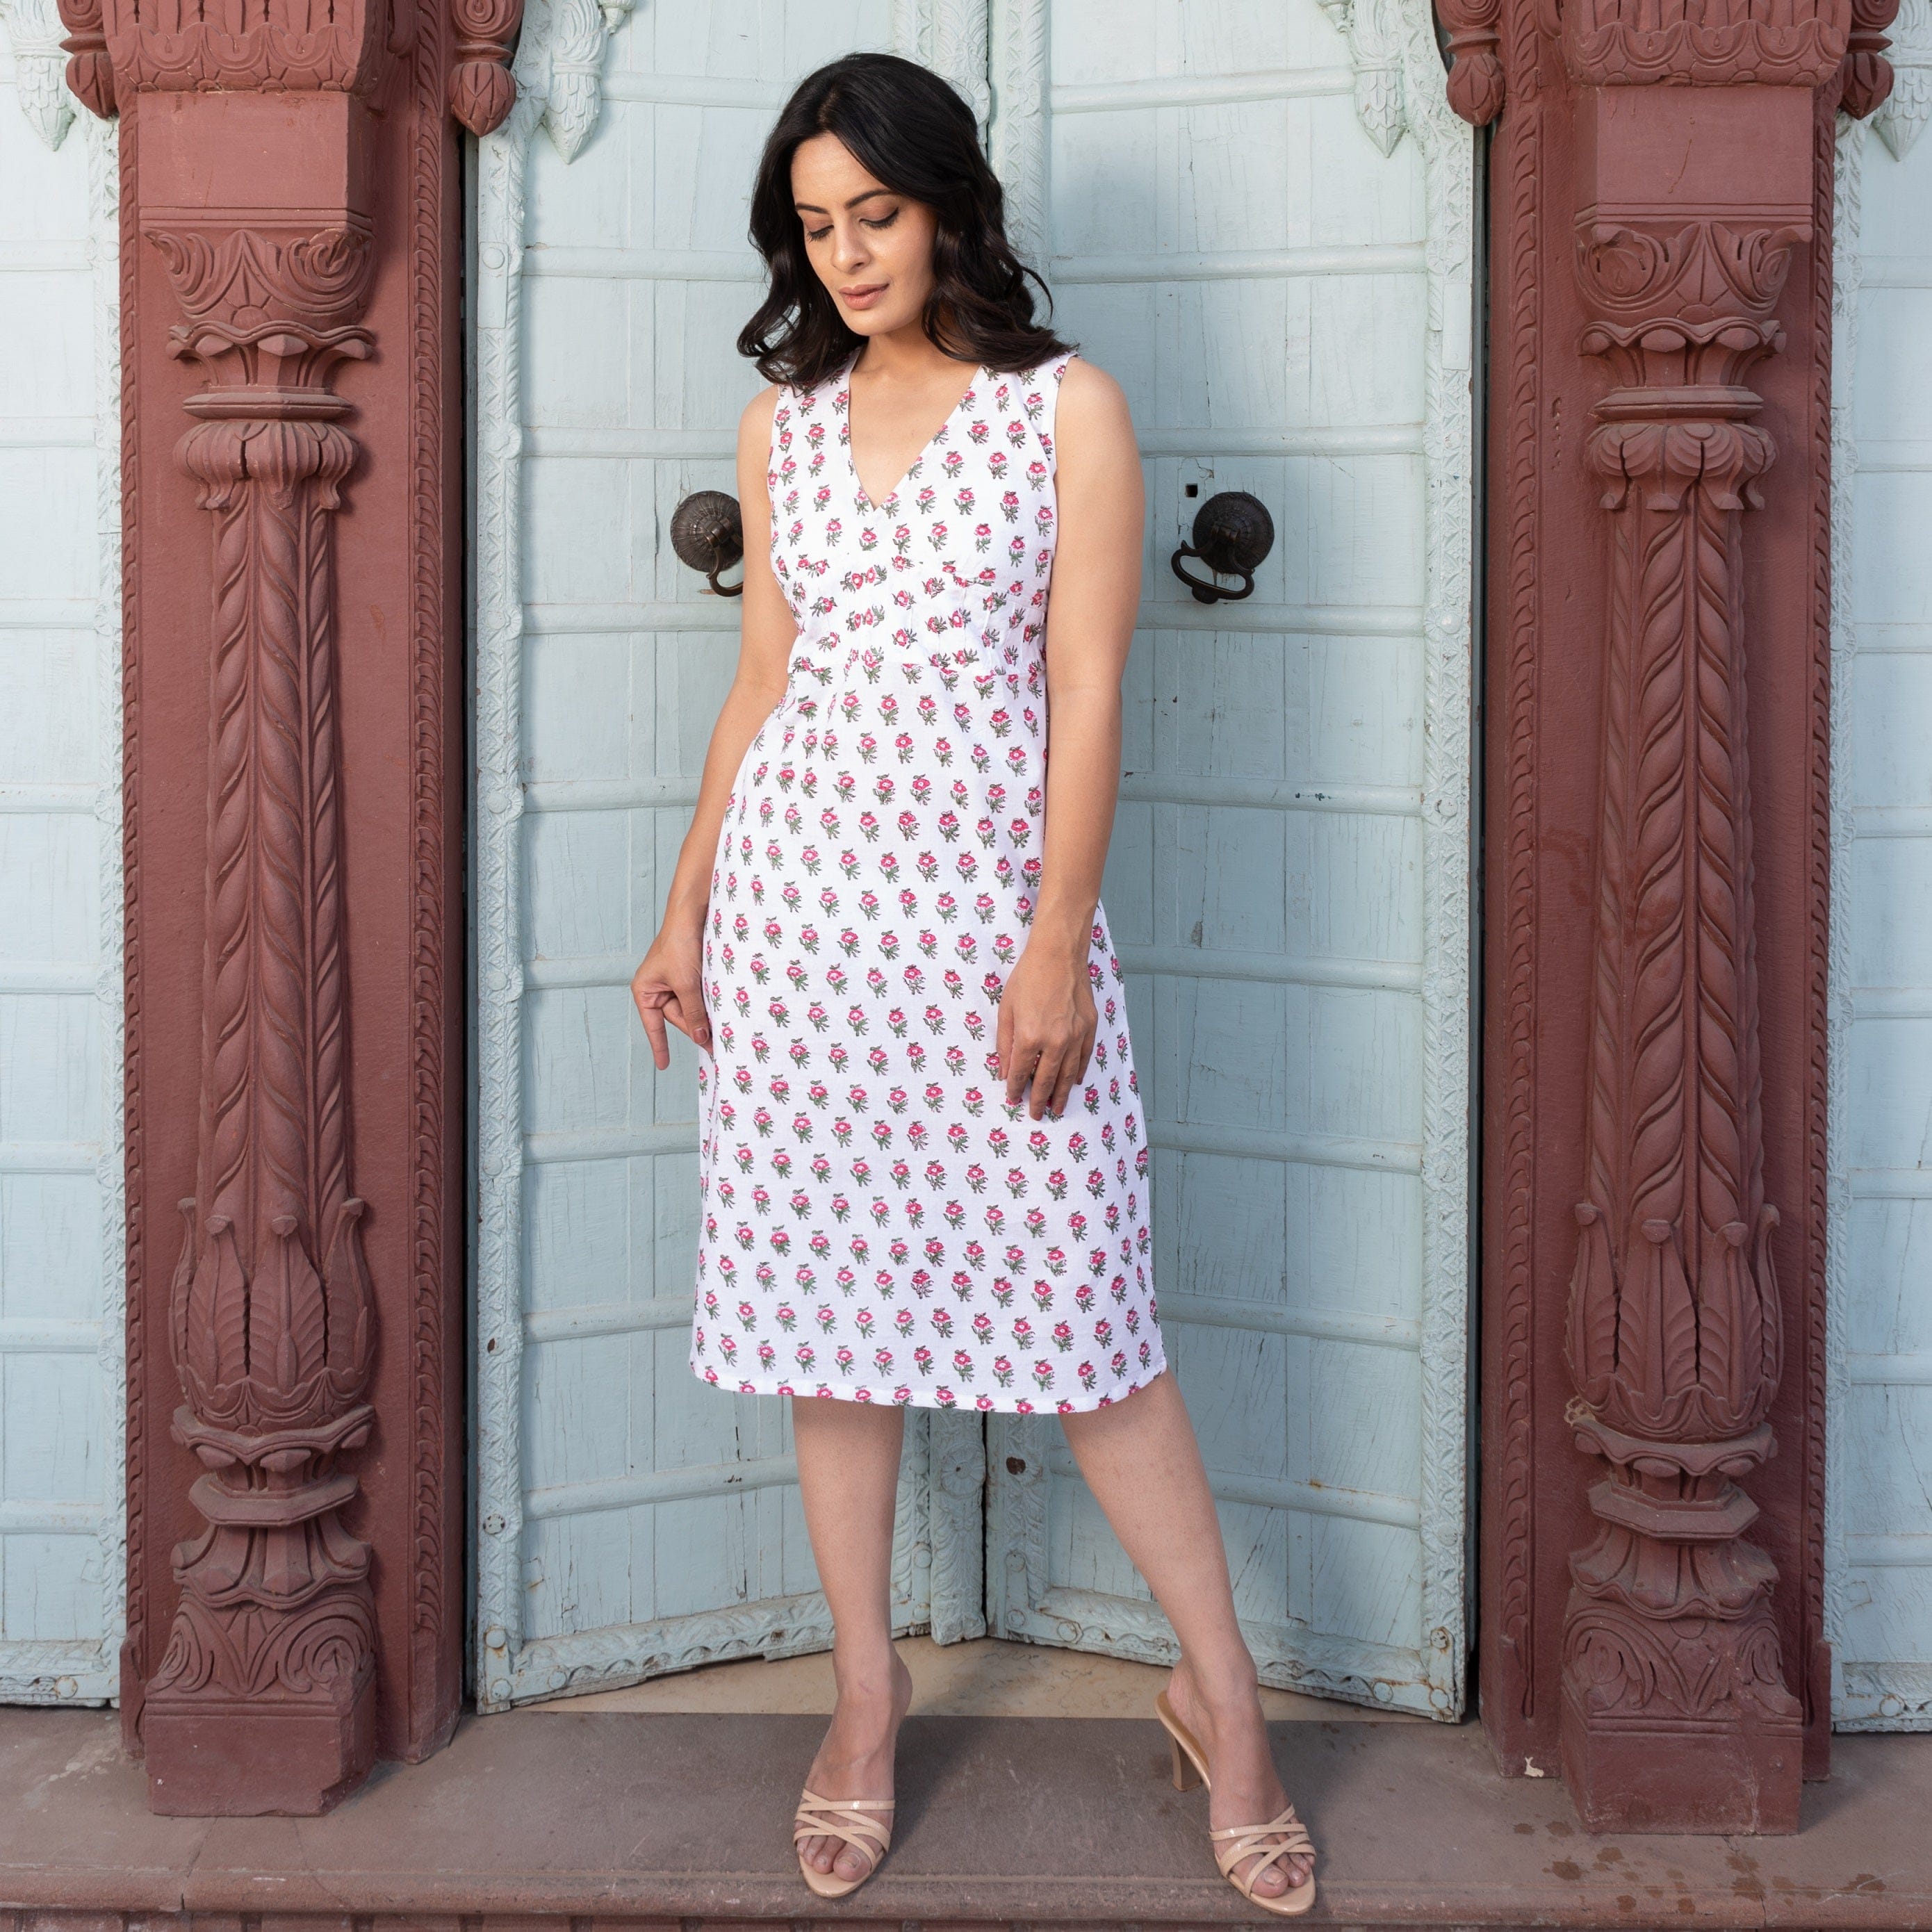 designer trendy handblock cotton dress in white and pink flowers with sequins for online shopping India using natural dye